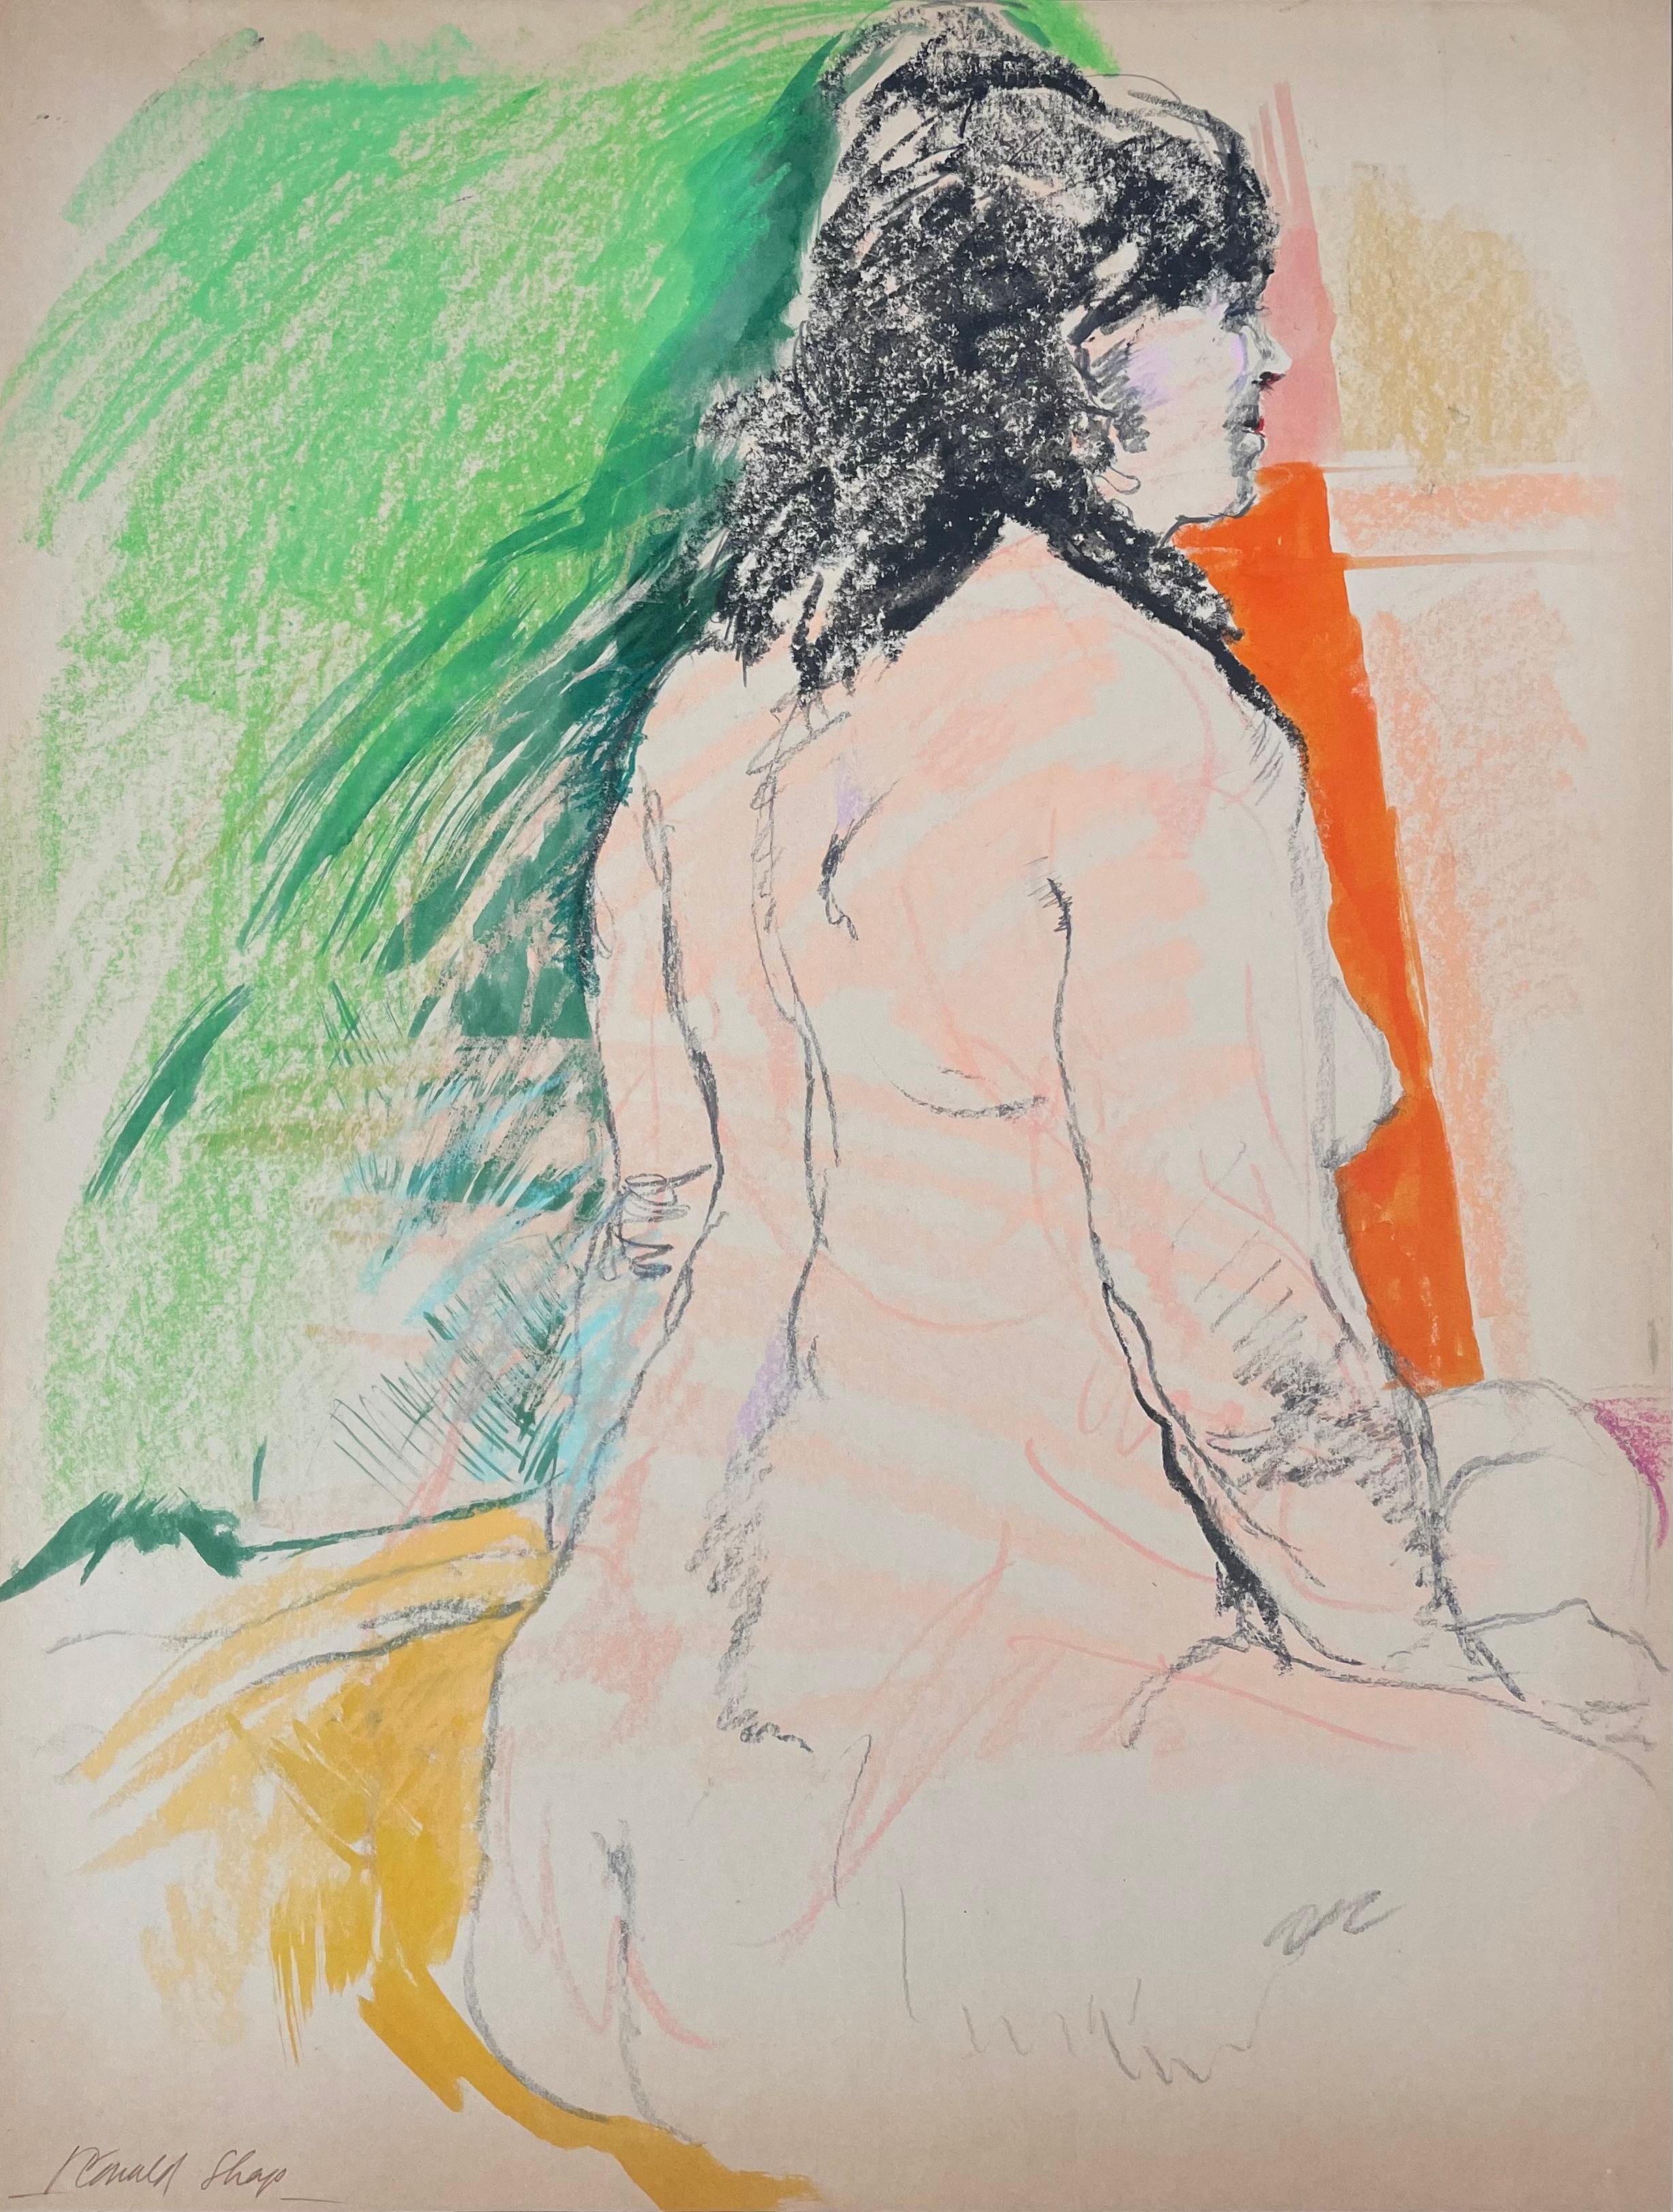 Original oil pastel and gouache figure drawing by celebrated, twentieth-century California landscape painter, Ronald Shap. Sketch of a nude woman with black hair with orange, green and pink. 23x17.5 inches. Signed. 

Ronald Shap was born in Toledo,